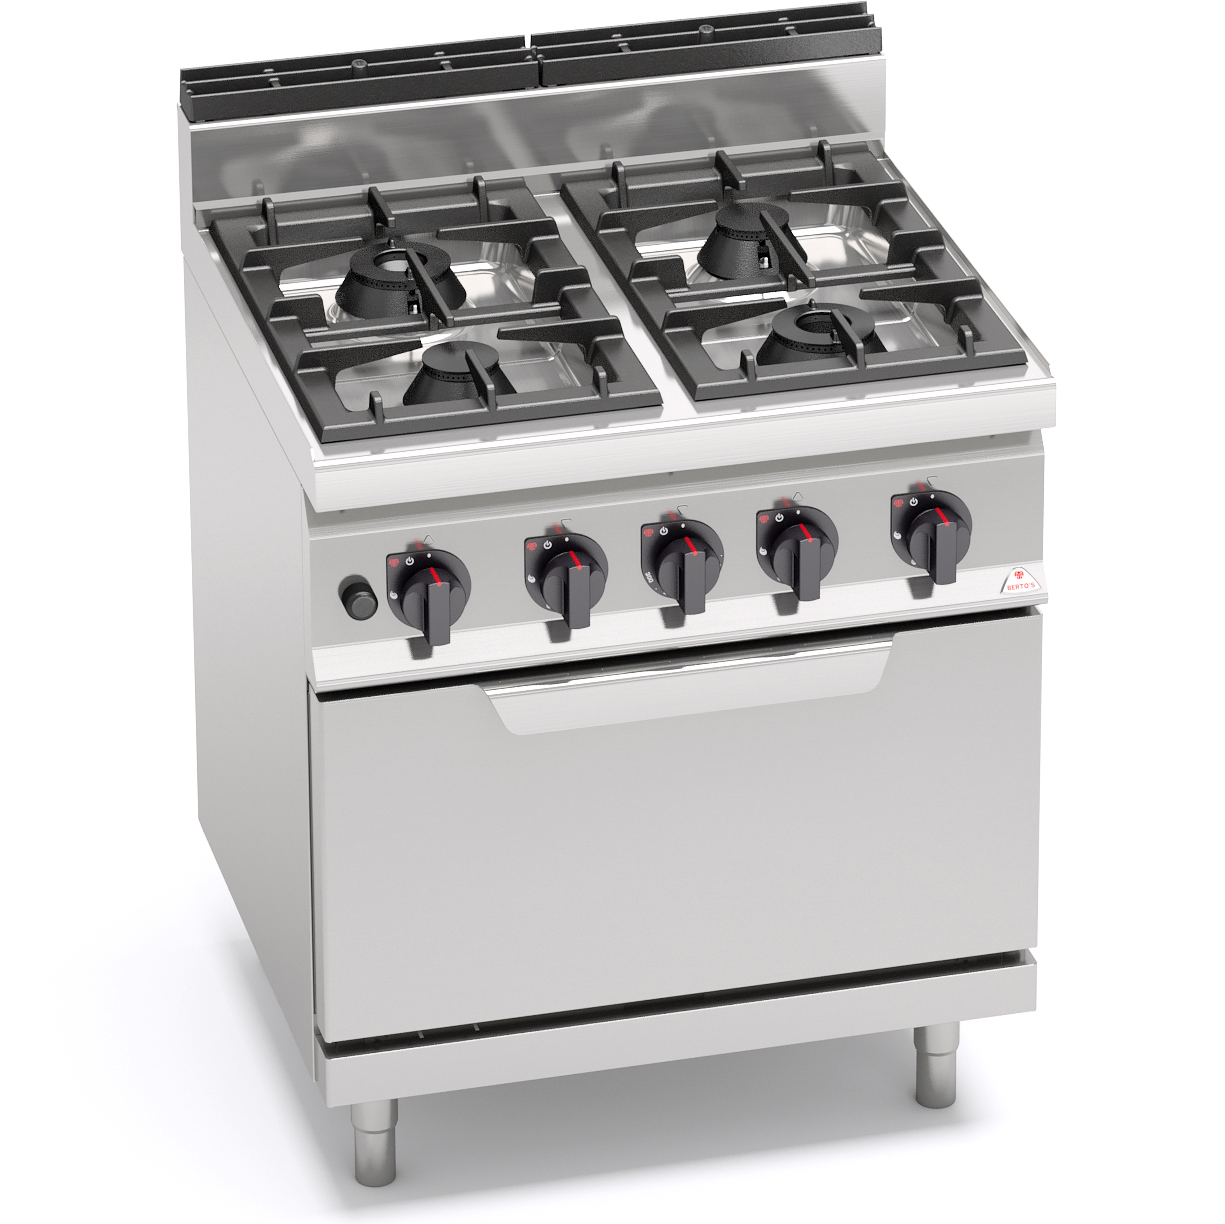 Berto's 4-Burner Stove With 2/1 Gas Oven